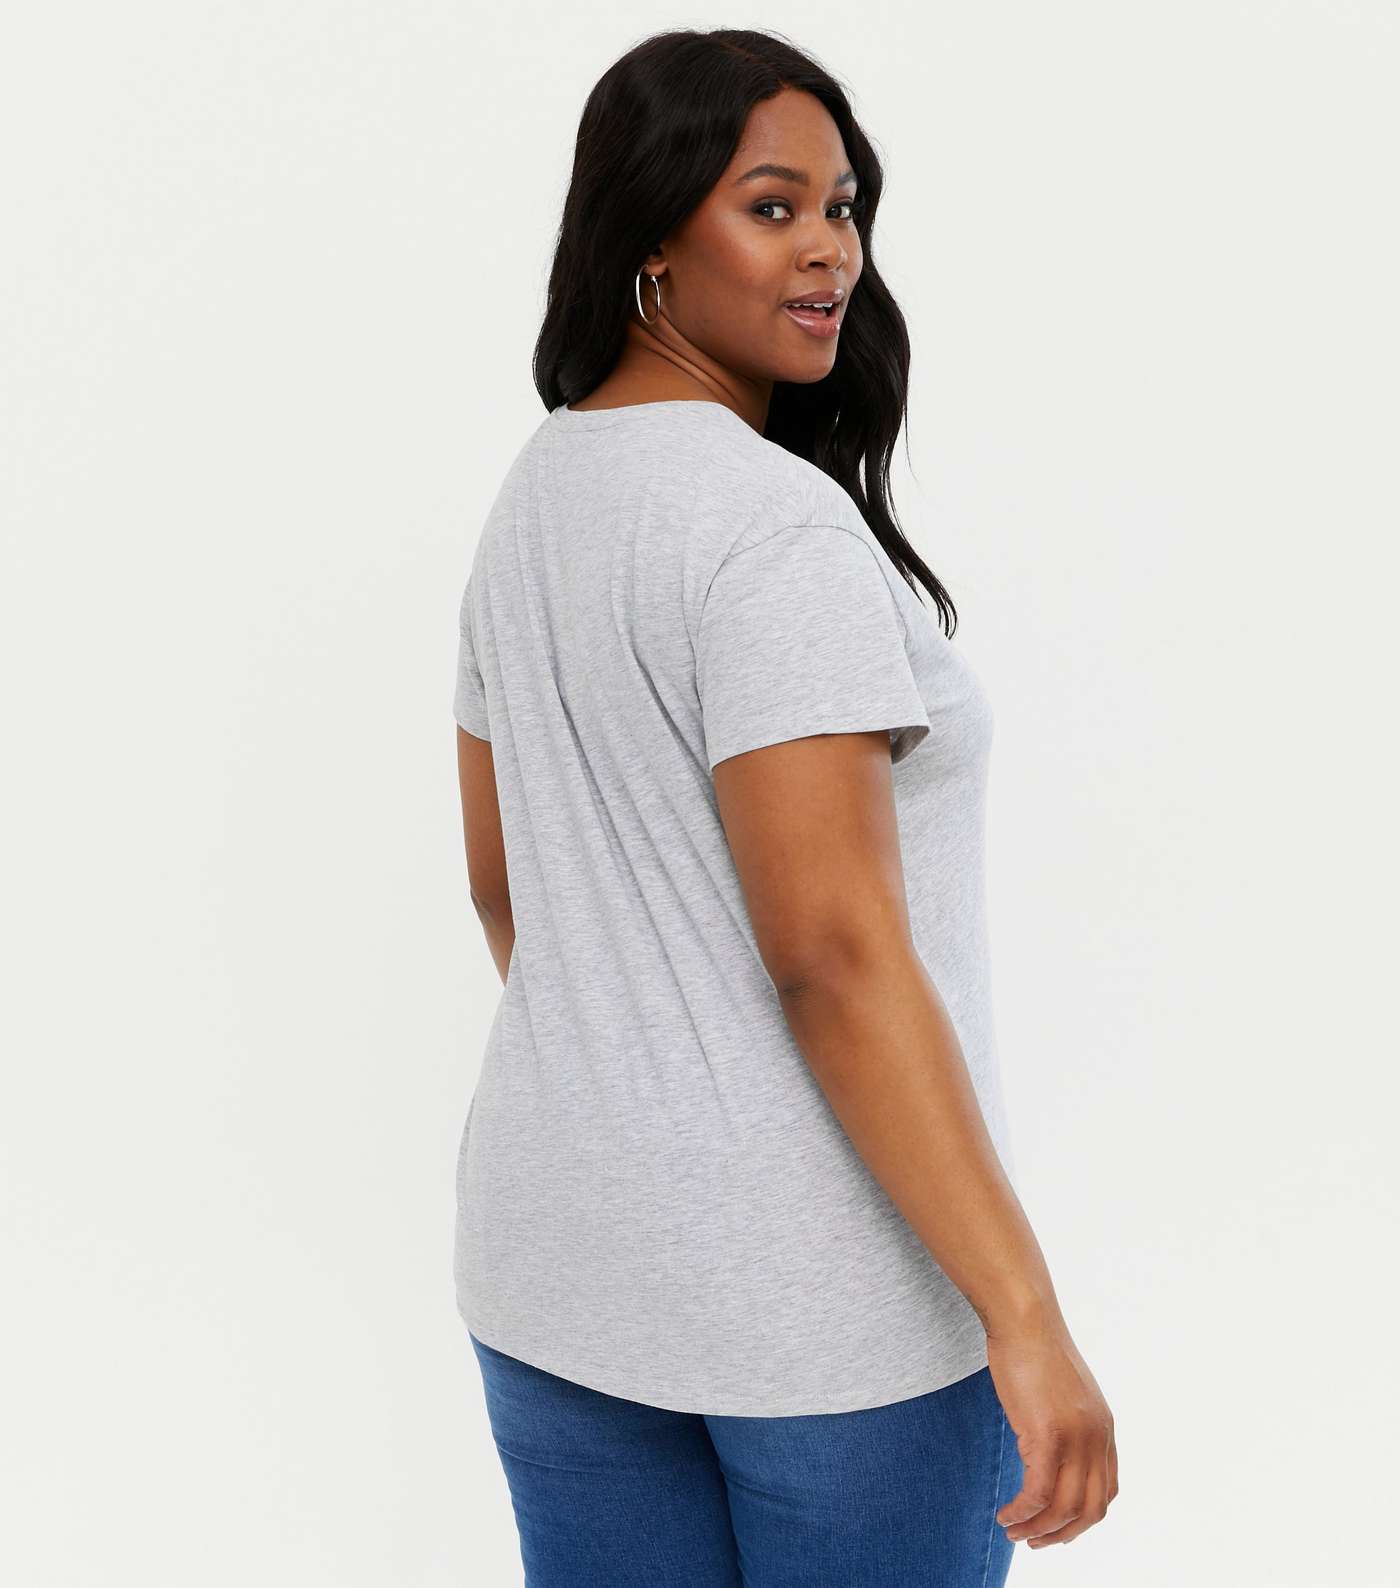 Curves 3 Pack Grey Black and White Crew Neck T-Shirts Image 4